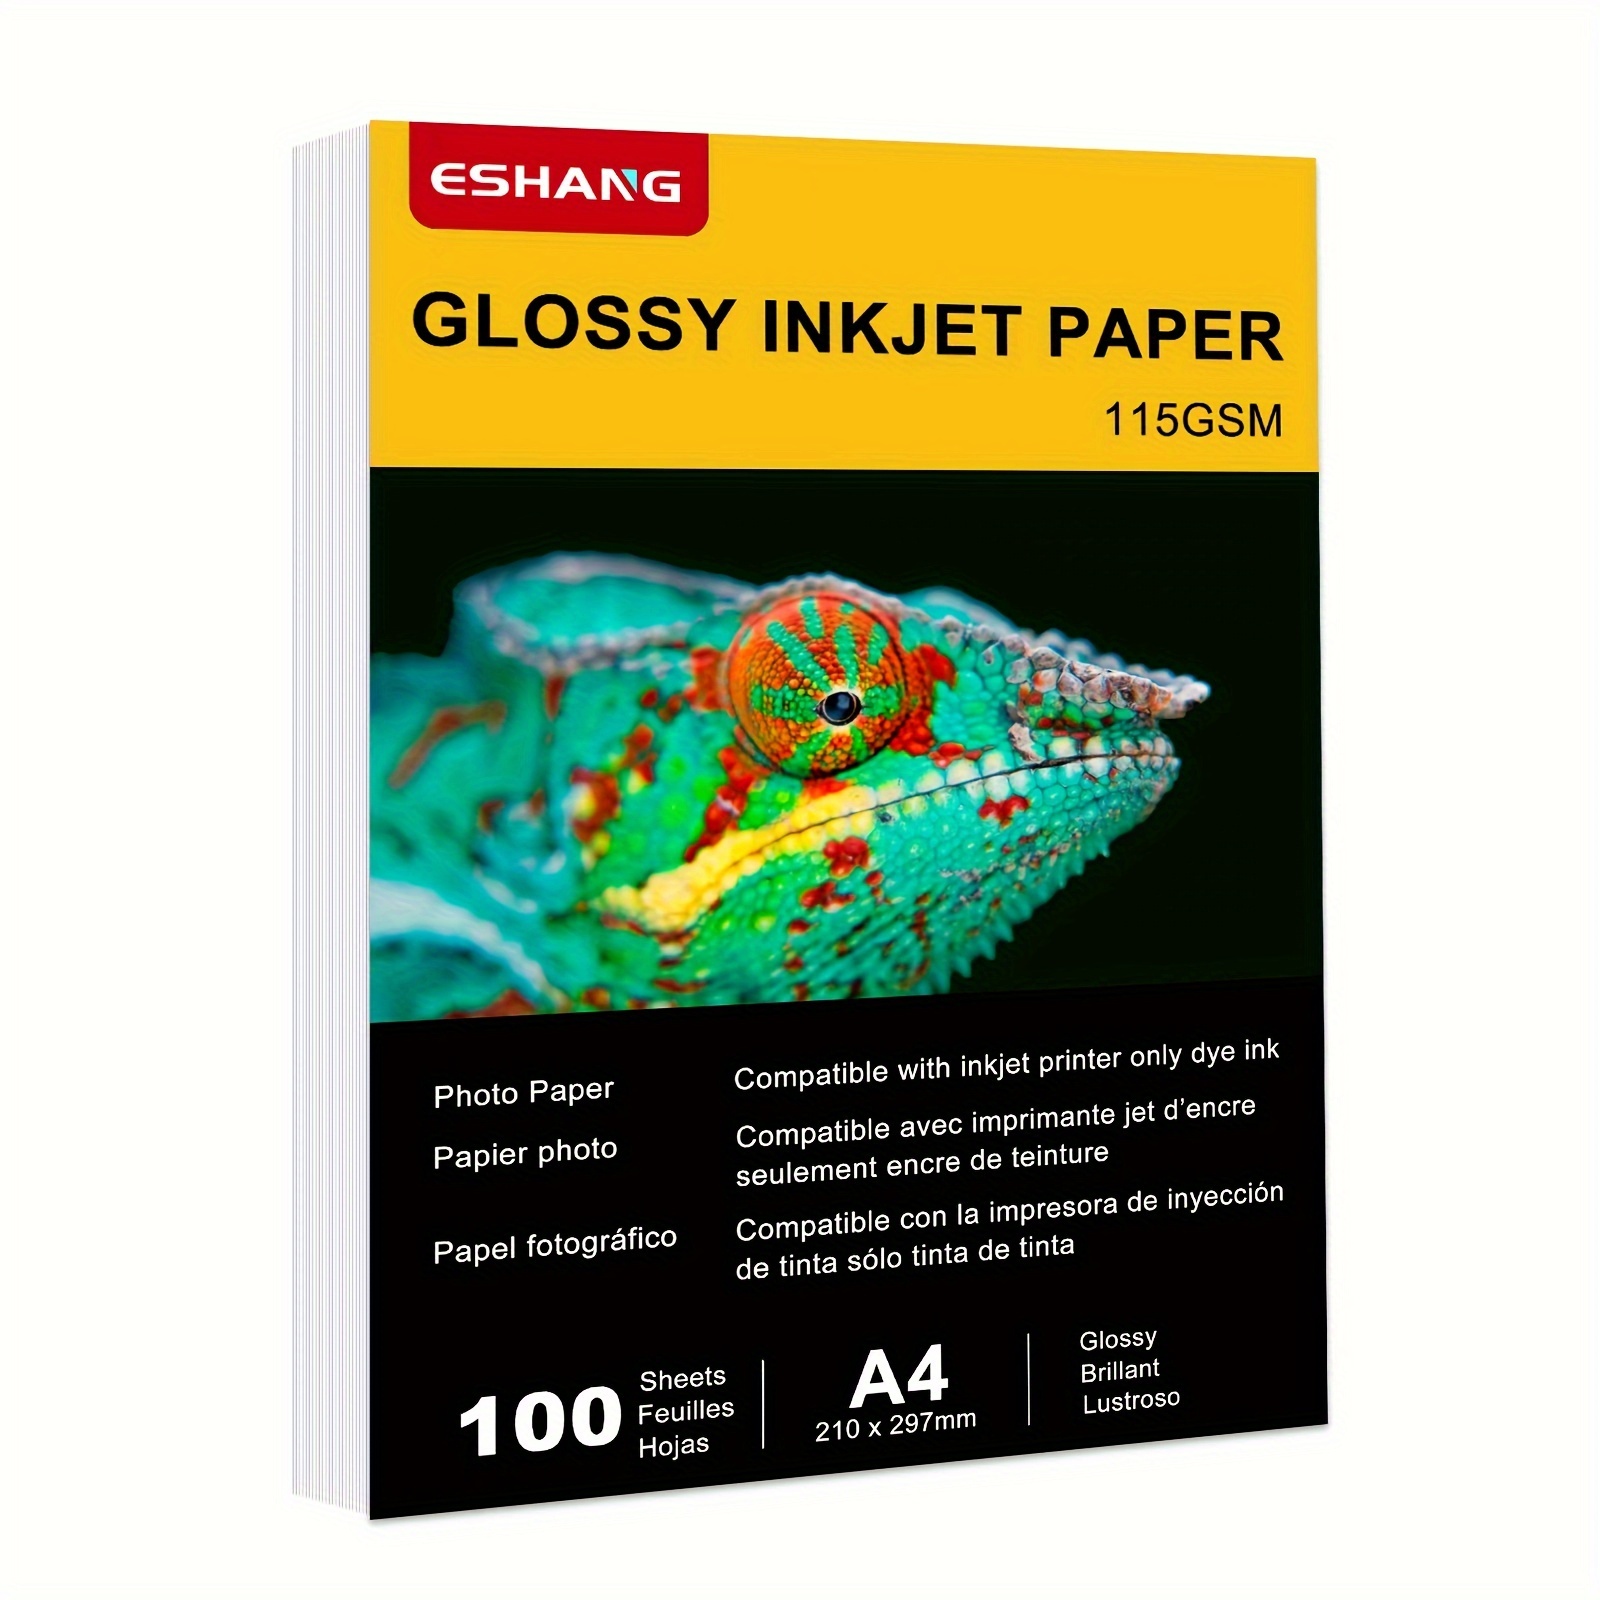 

A4 Premium Glossy Inkjet Paper, 8.3x11.7", 100 Sheets - Recyclable, High-quality Print For Inkjet Printers, 115gsm Printer Paper Printer Ink Cartridges